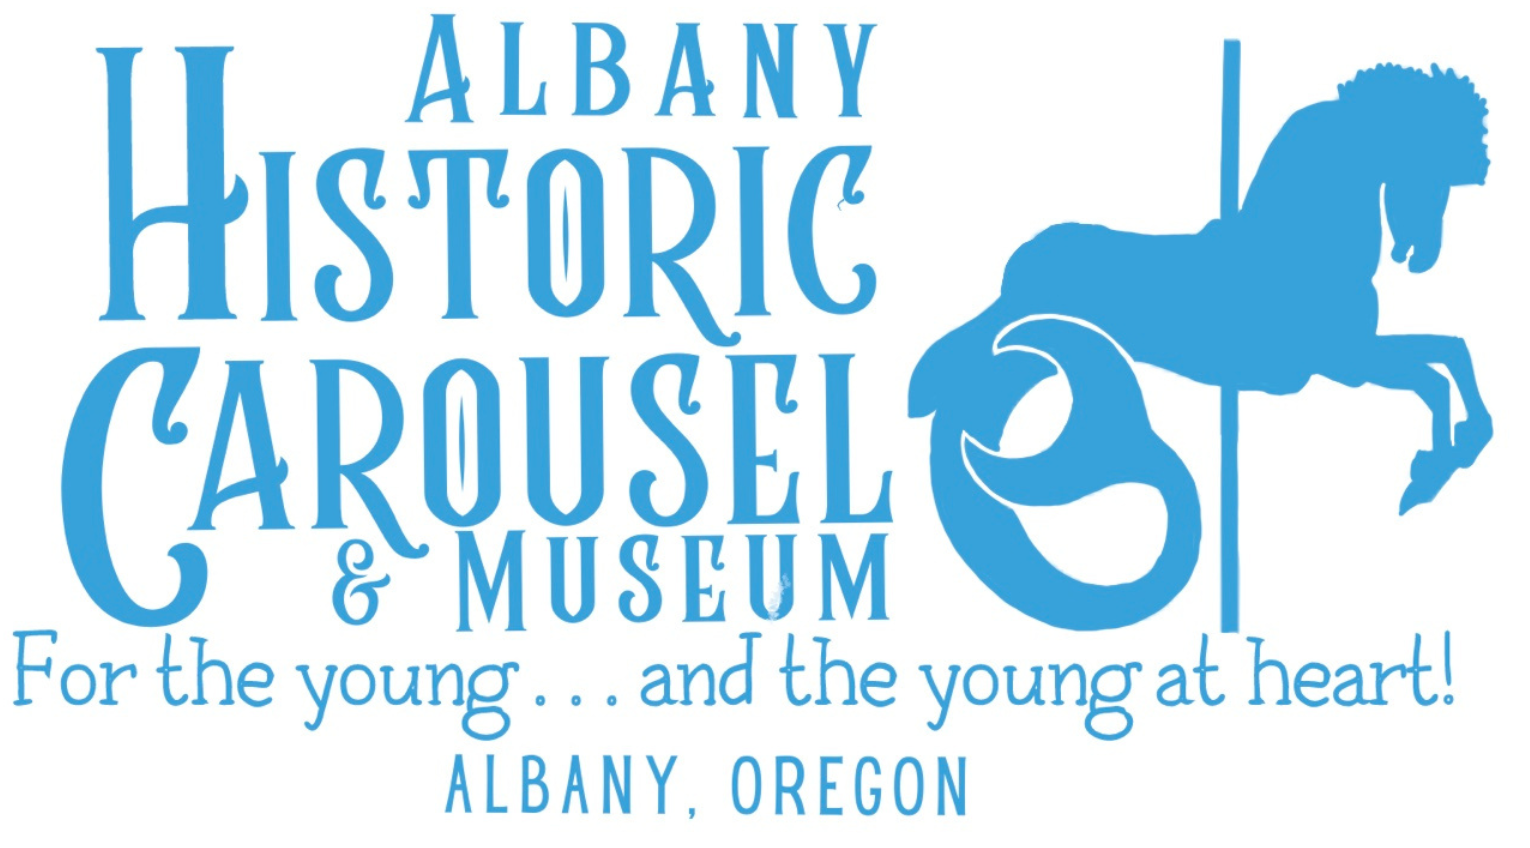 About - Historic Carousel & Museum of Albany